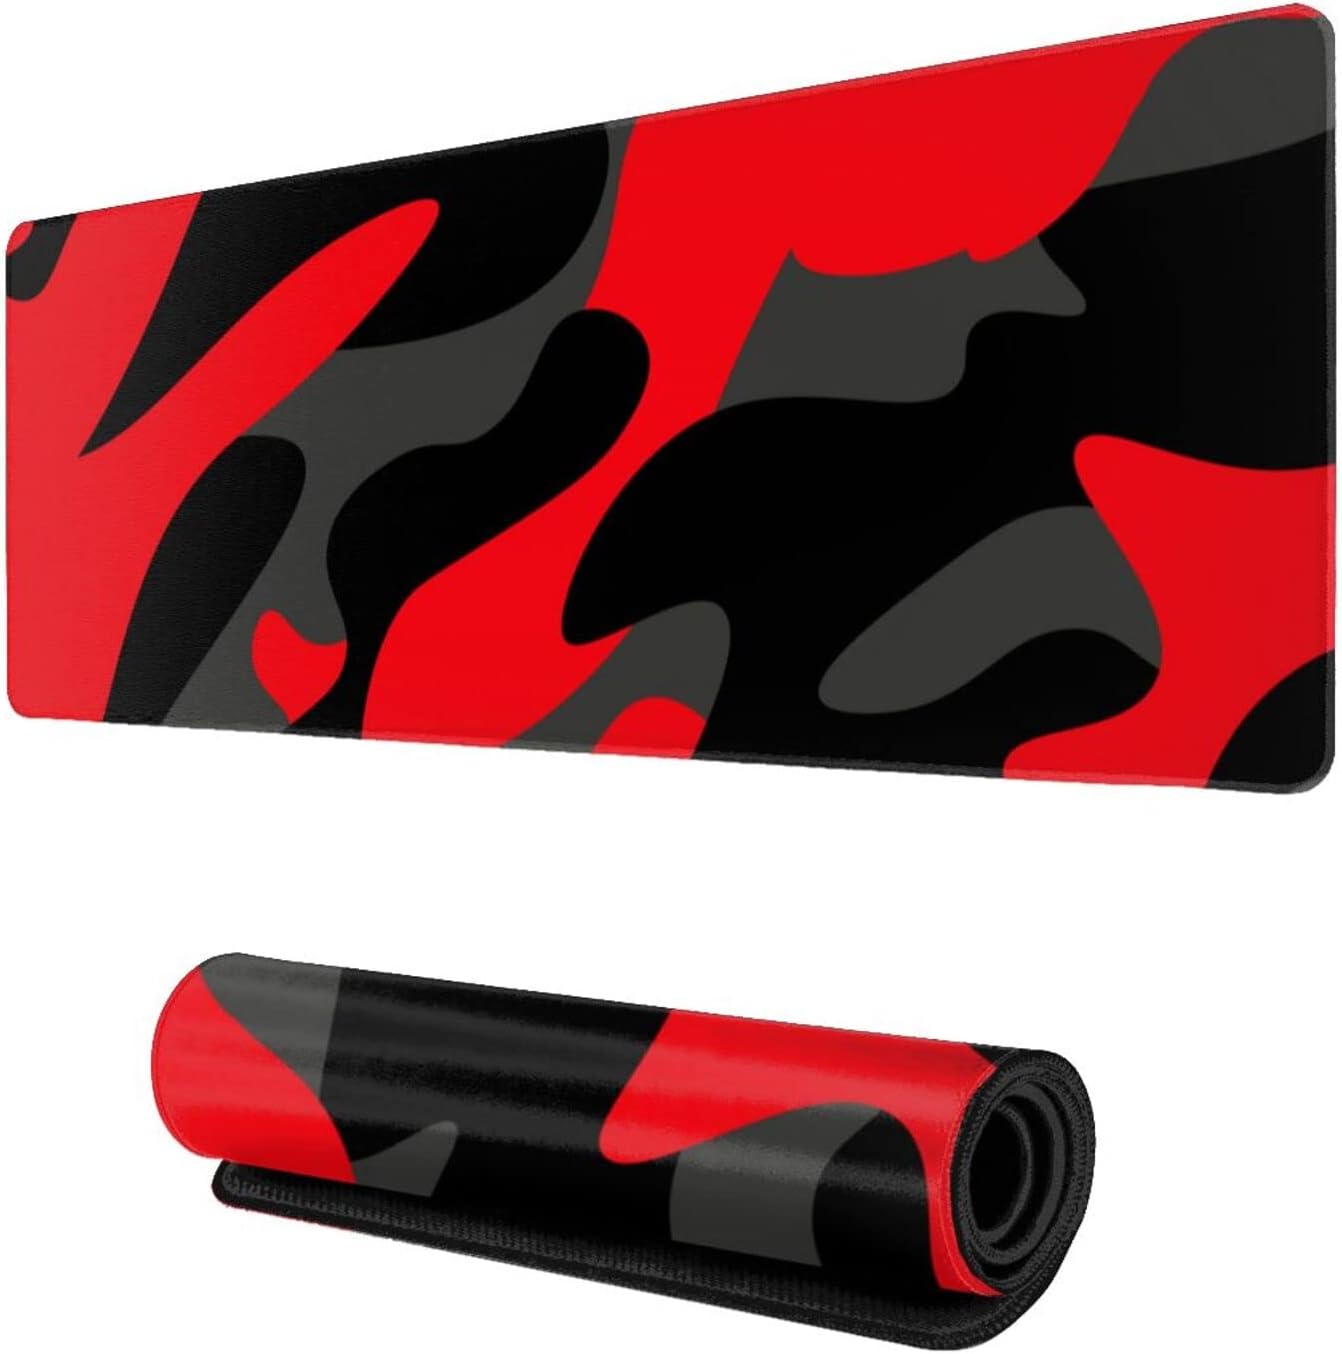 Red and Black and Grey Camo Large Gaming Mouse Pad XL,with Stitched Edges Long Extended Waterproof Desk Mat Non Slip Mousepad 31.5 X 11.8 Inch